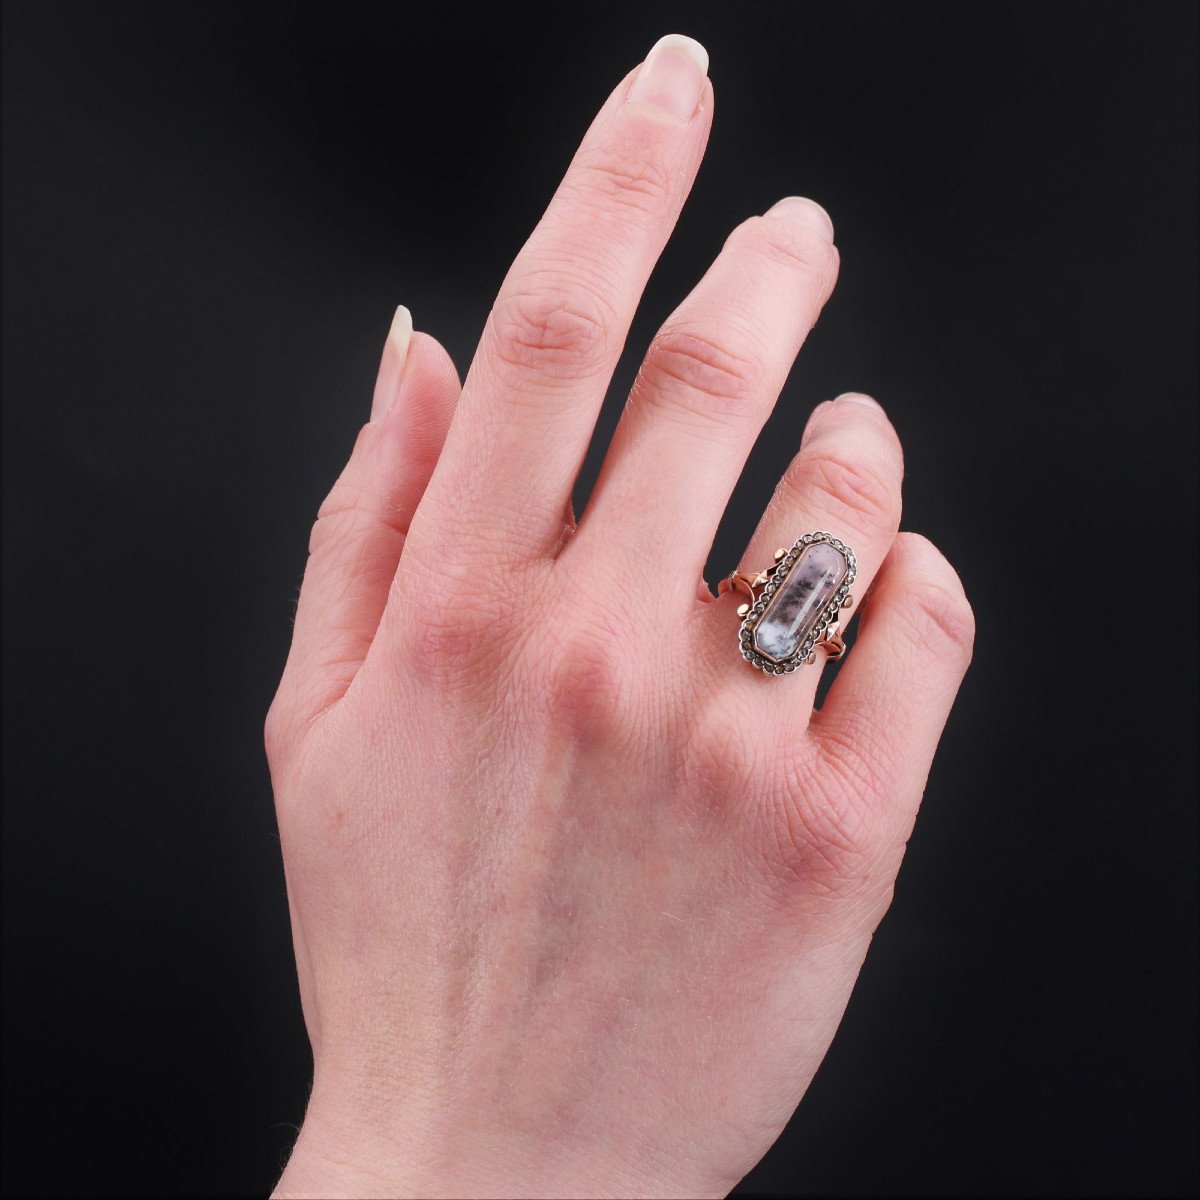 Old Agate Ring With Dentrite And Diamonds-photo-4